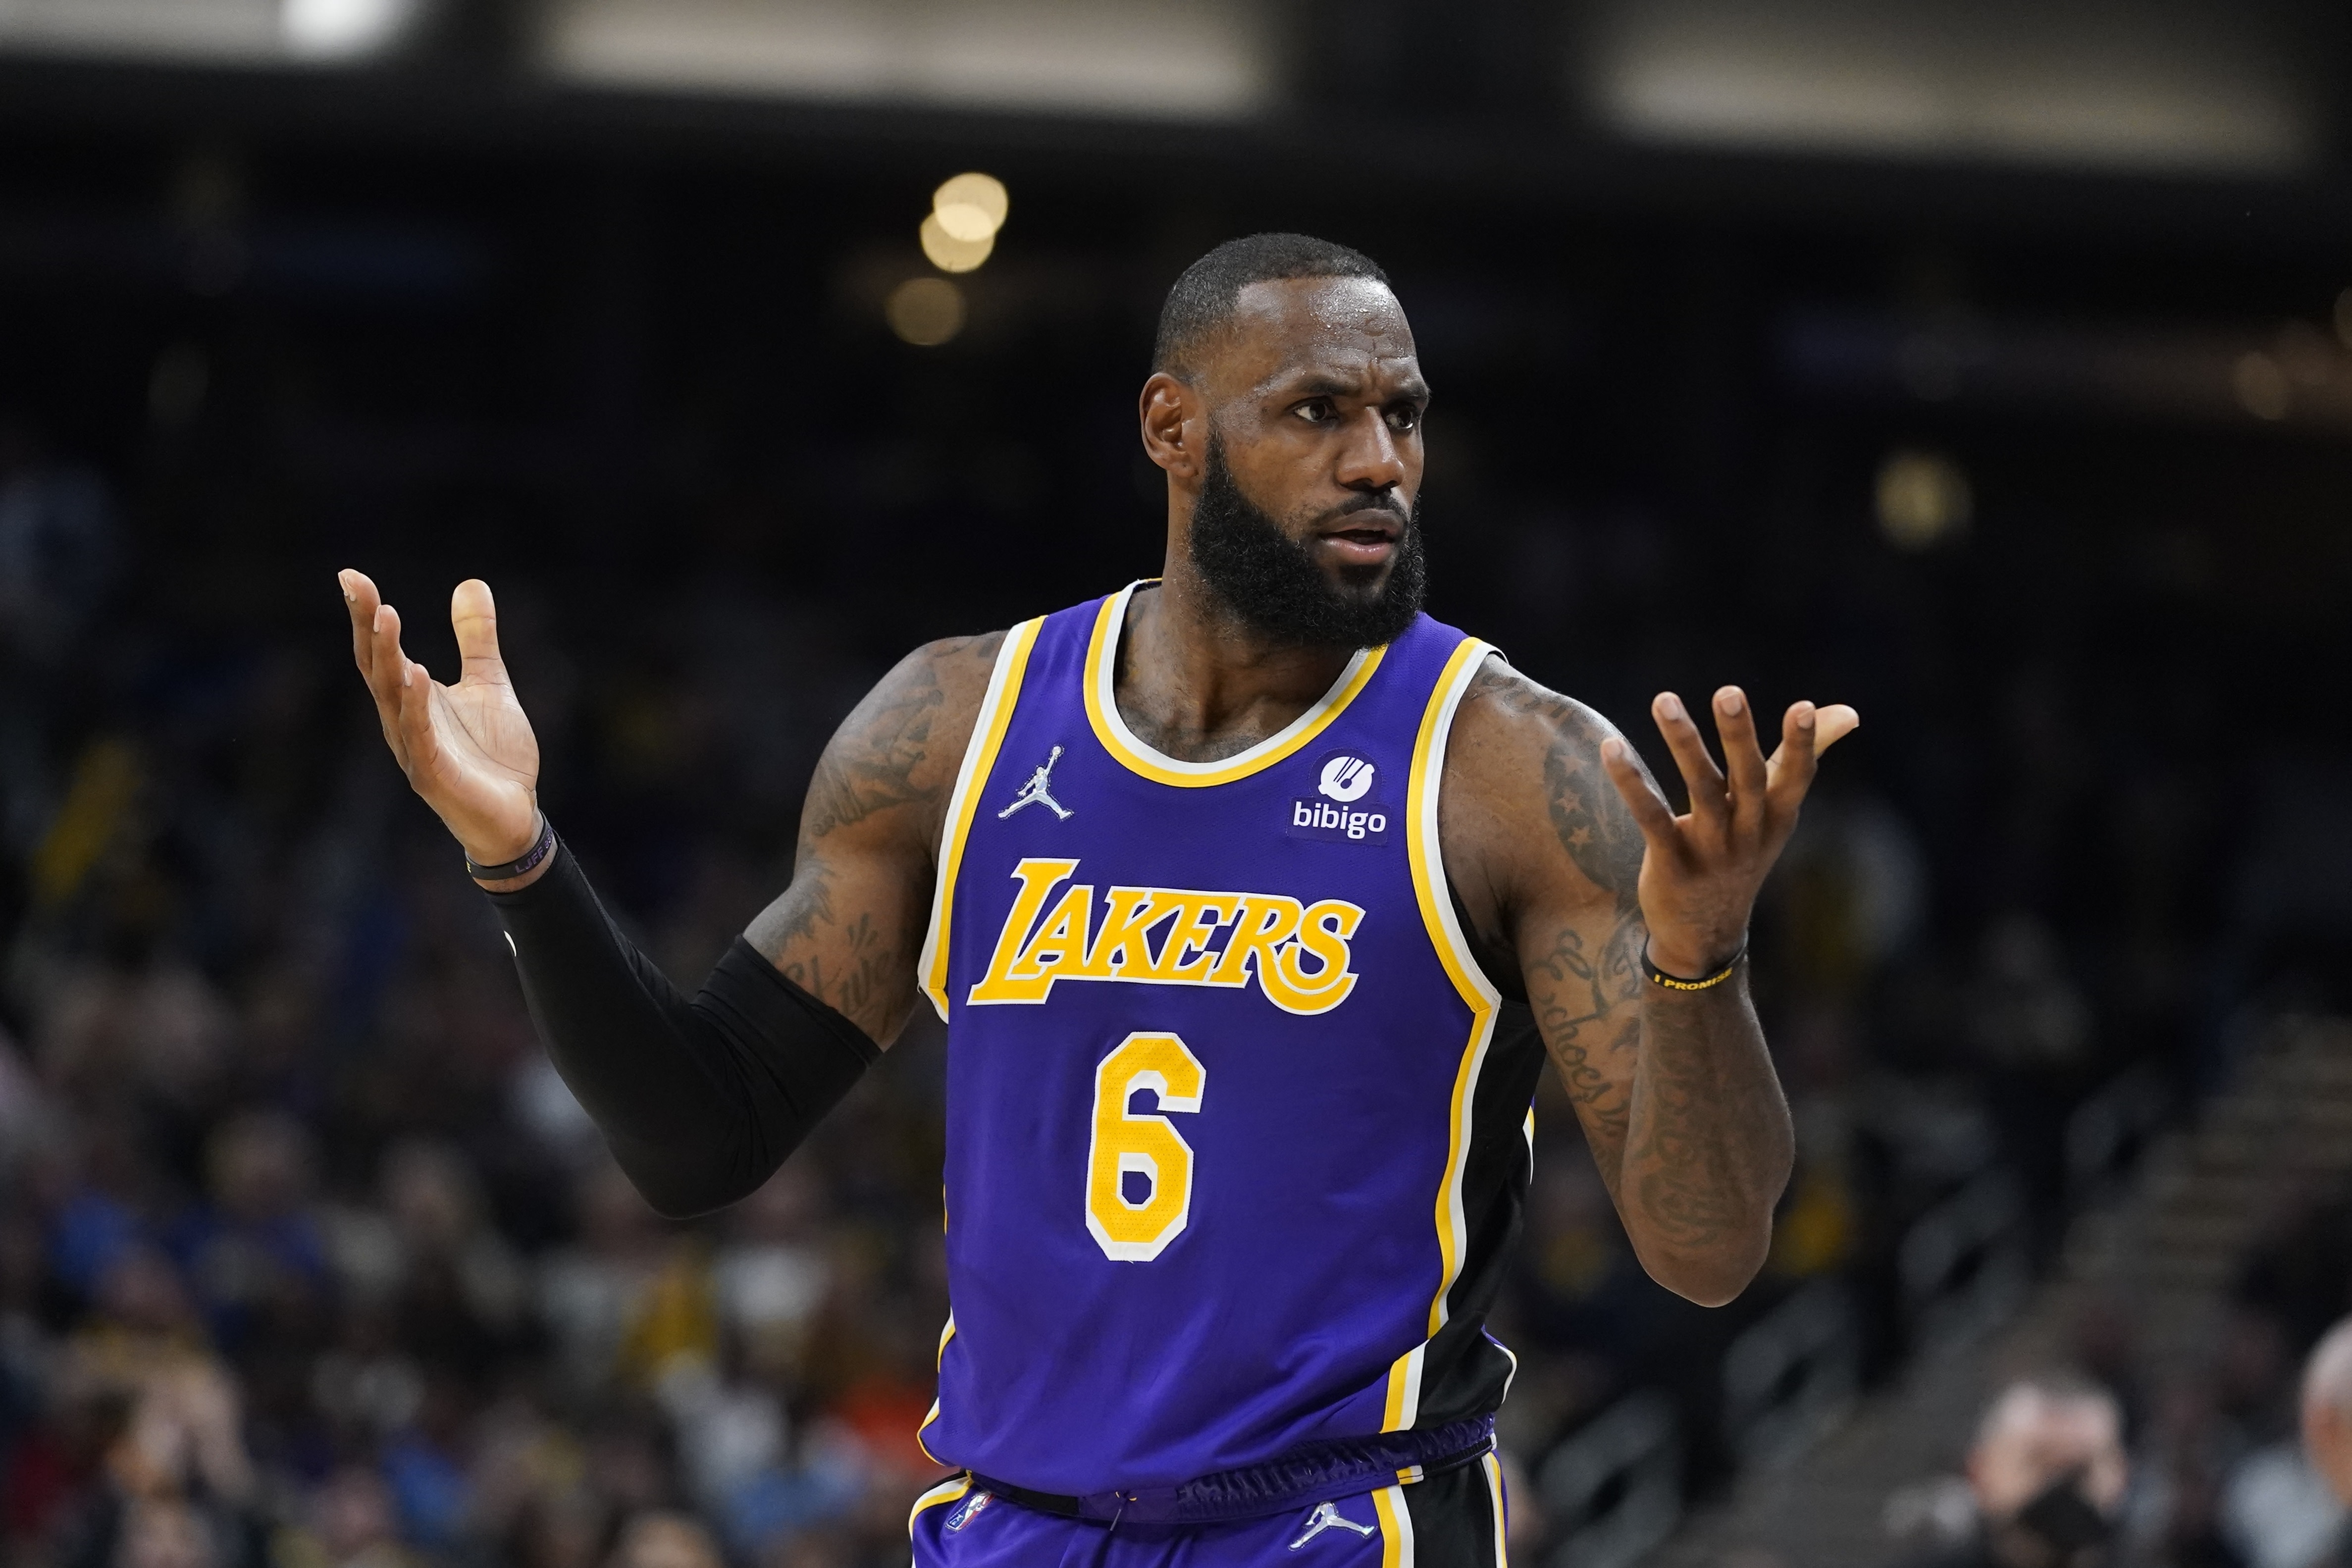 Lakers' LeBron James Fined $15K for Celebration After 3-Pointer vs. Pacers